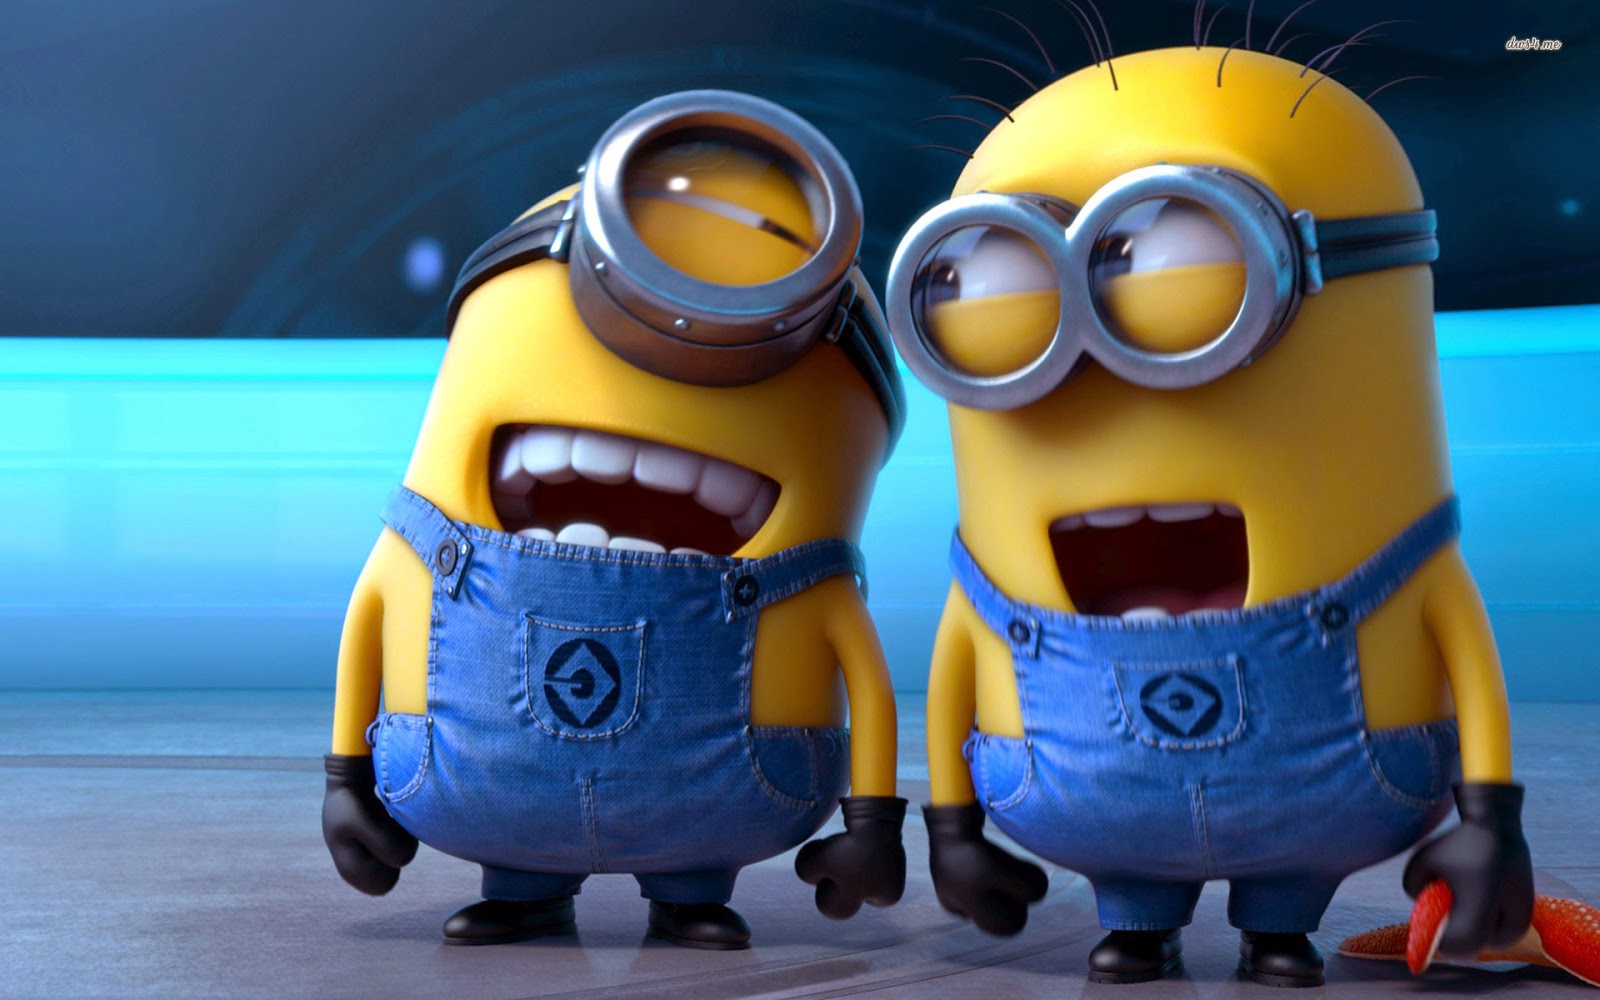 Live Minions Wallpaper 70 images